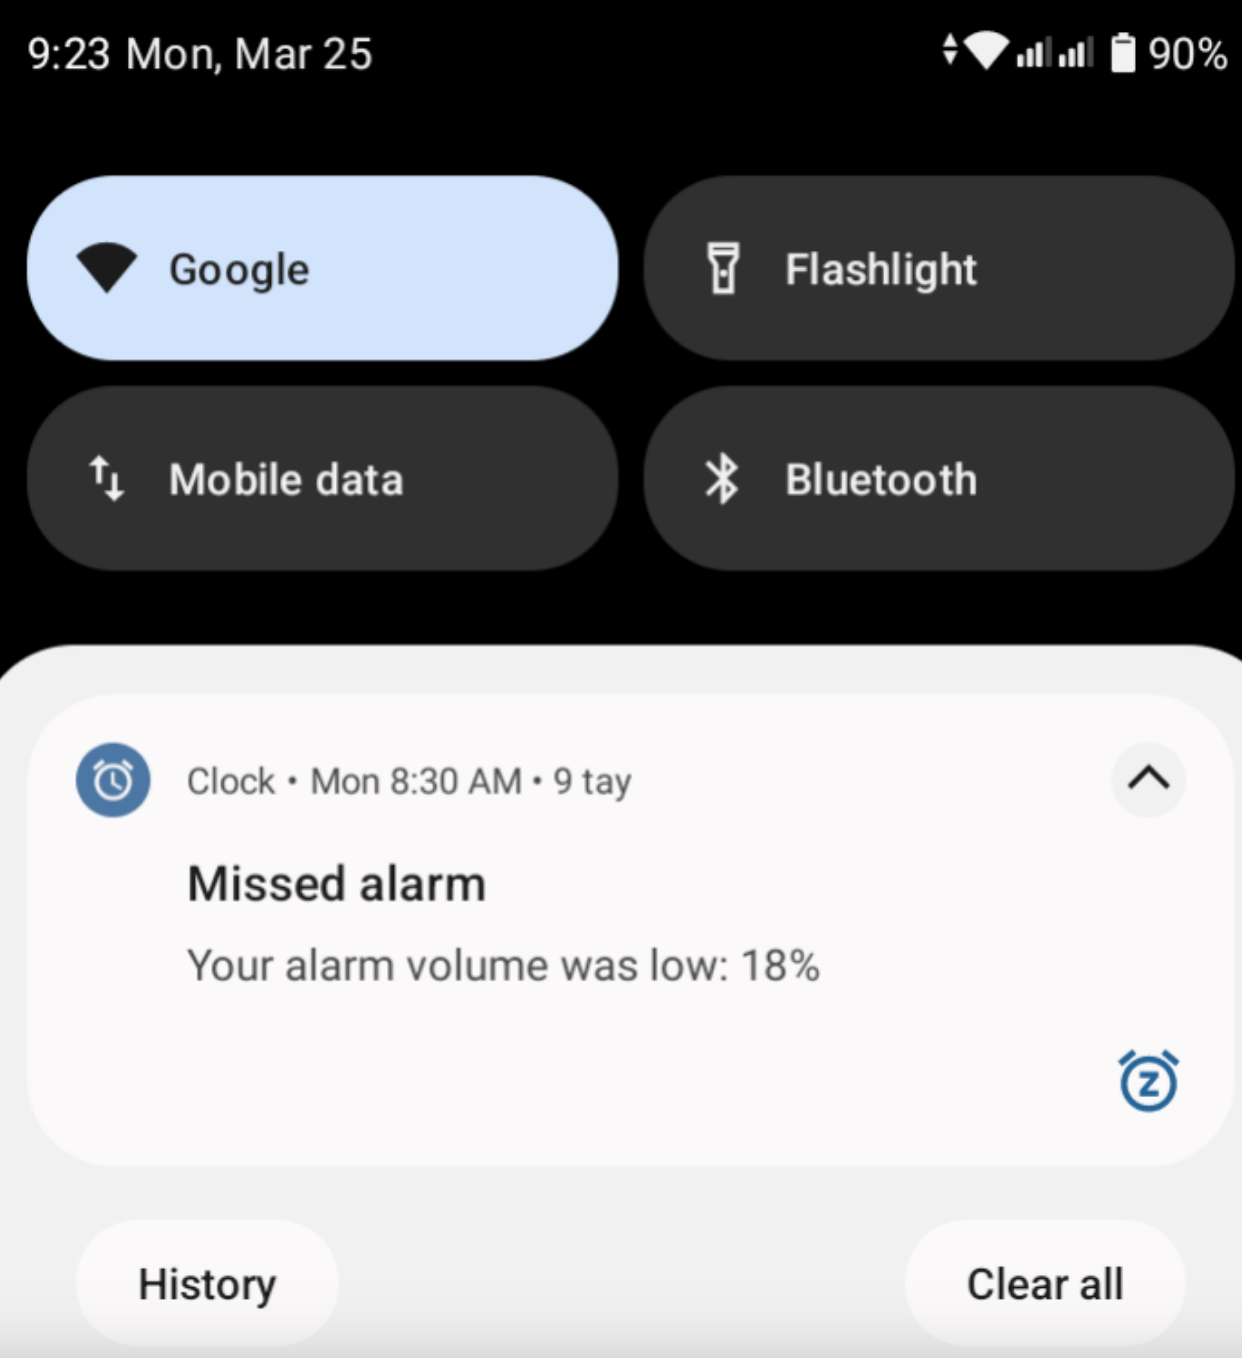 Phone screen showing notification &quot;Your alarm volume was low: 18%&quot; with icons for Google, flashlight, mobile data, and Bluetooth